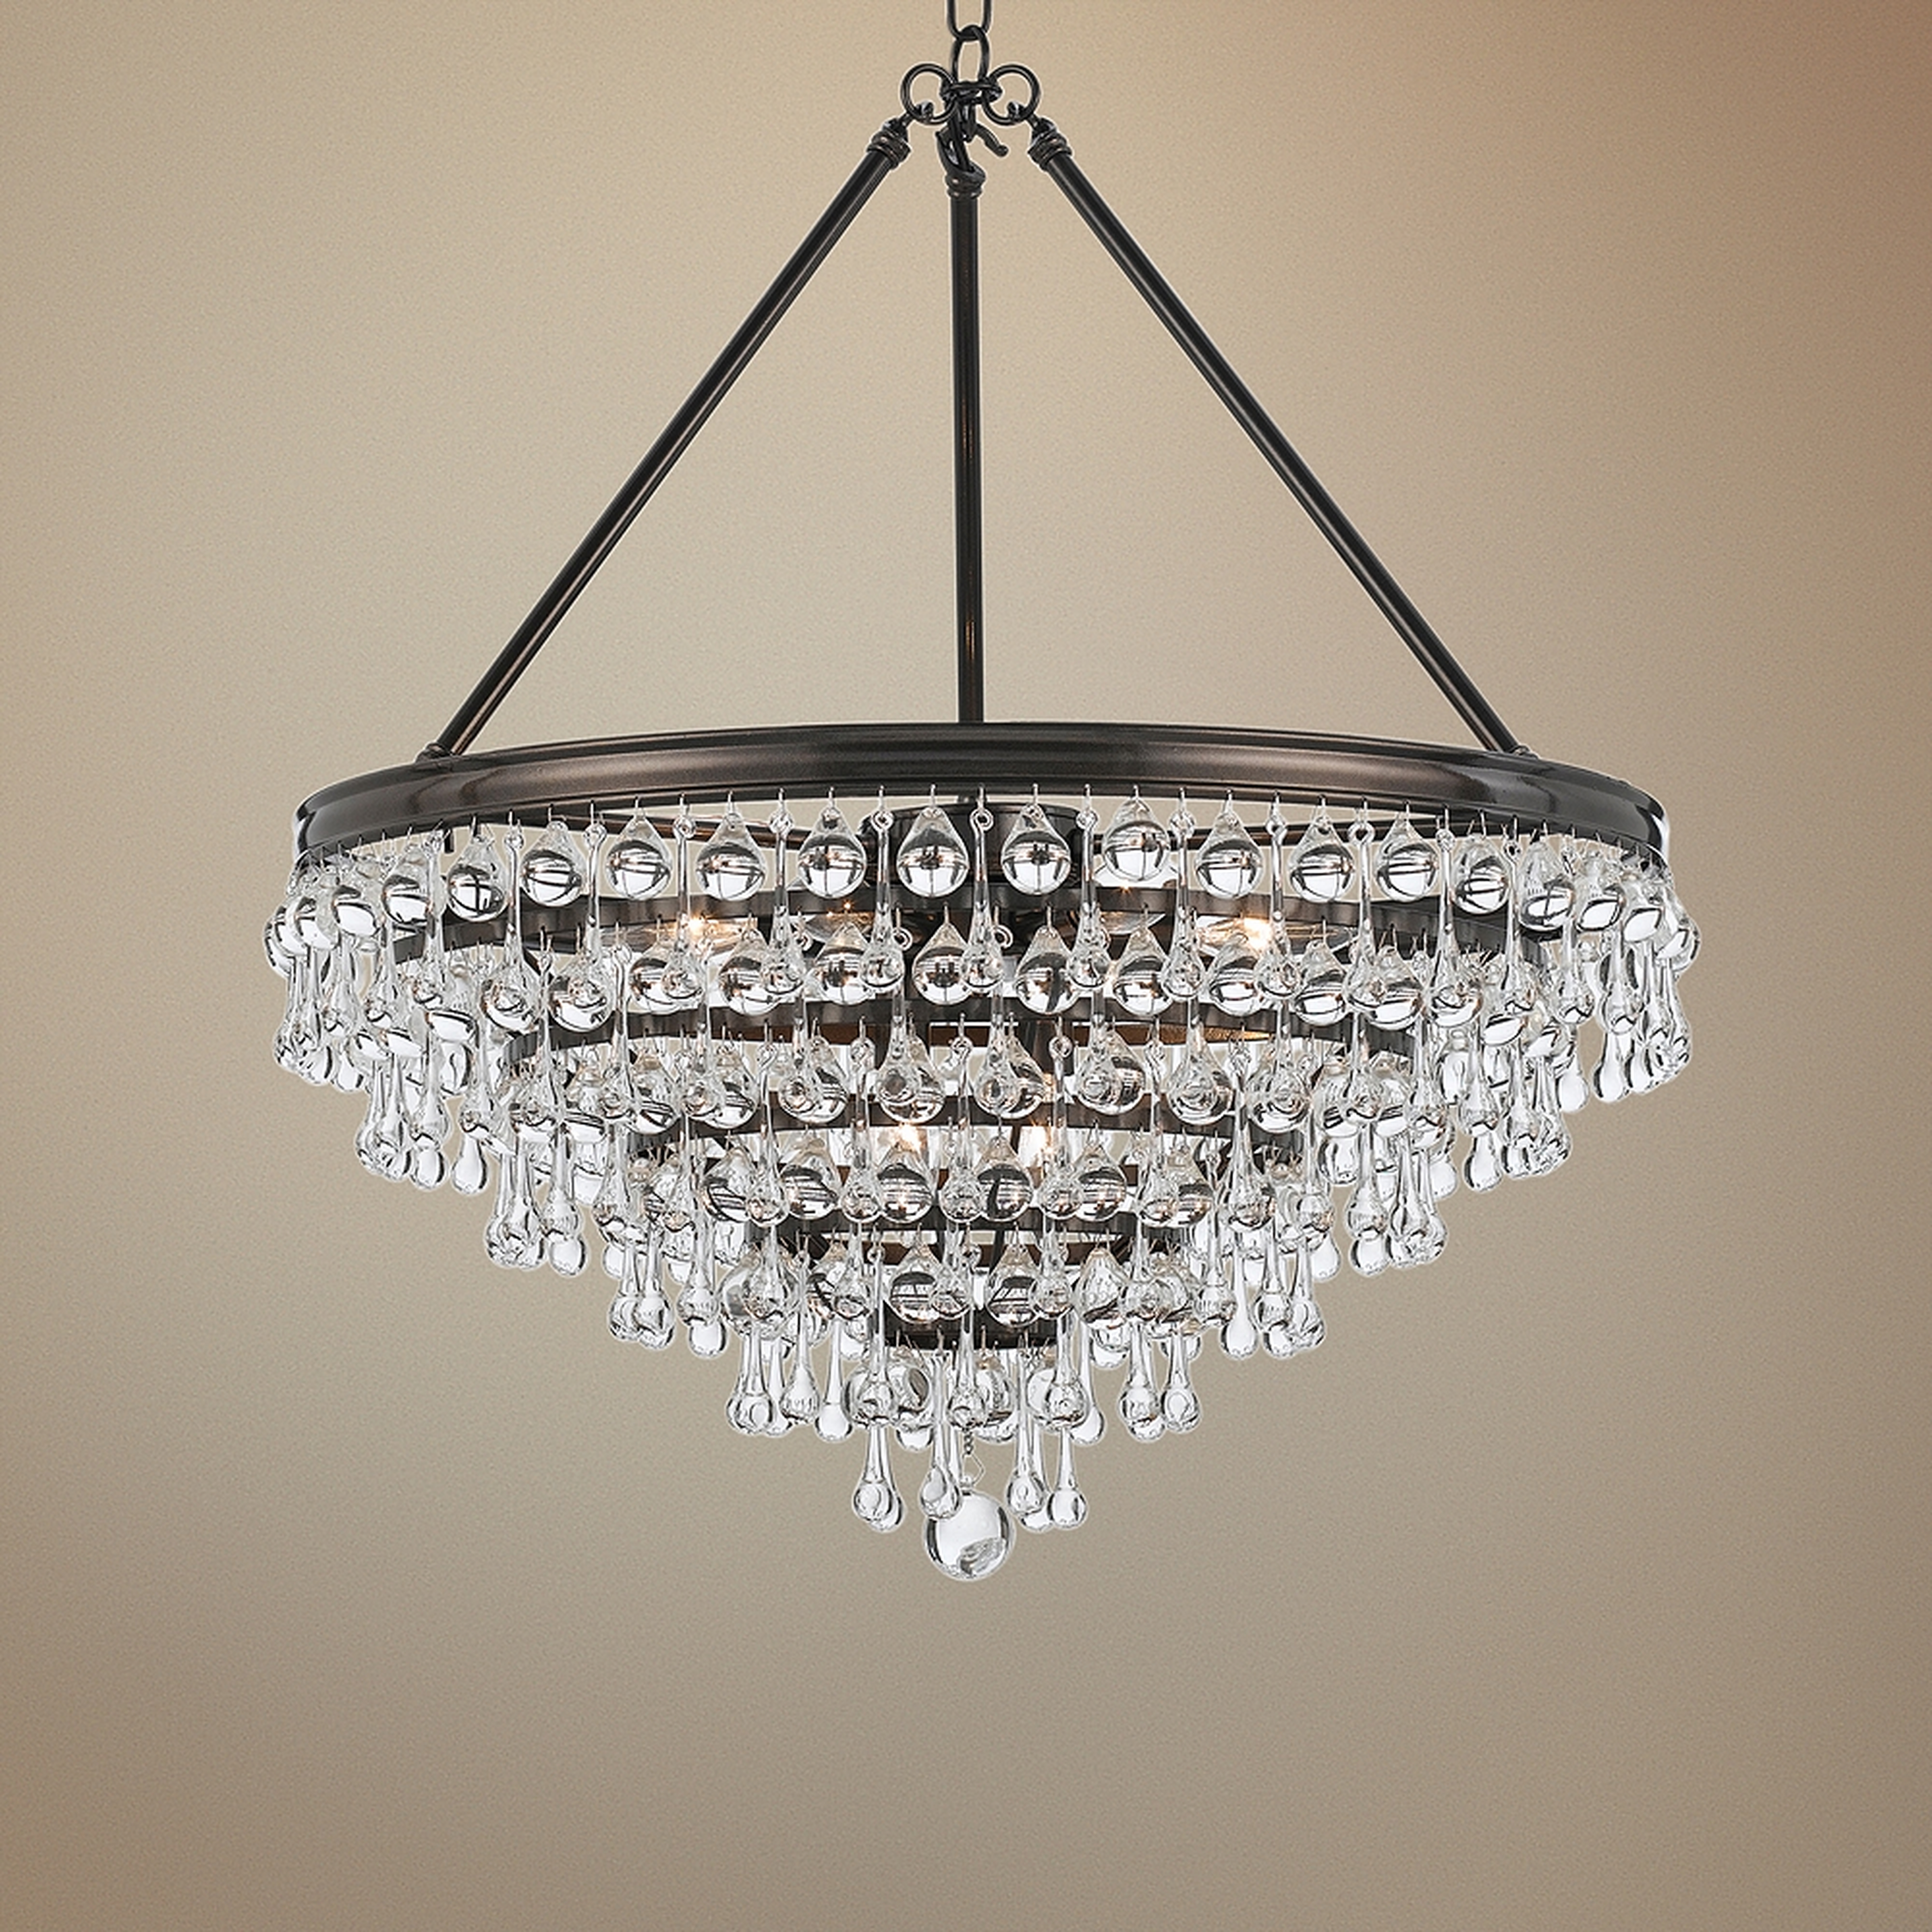 Calypso 24" Wide Vibrant Bronze and Crystal Chandelier - Style # 6F644 - Lamps Plus